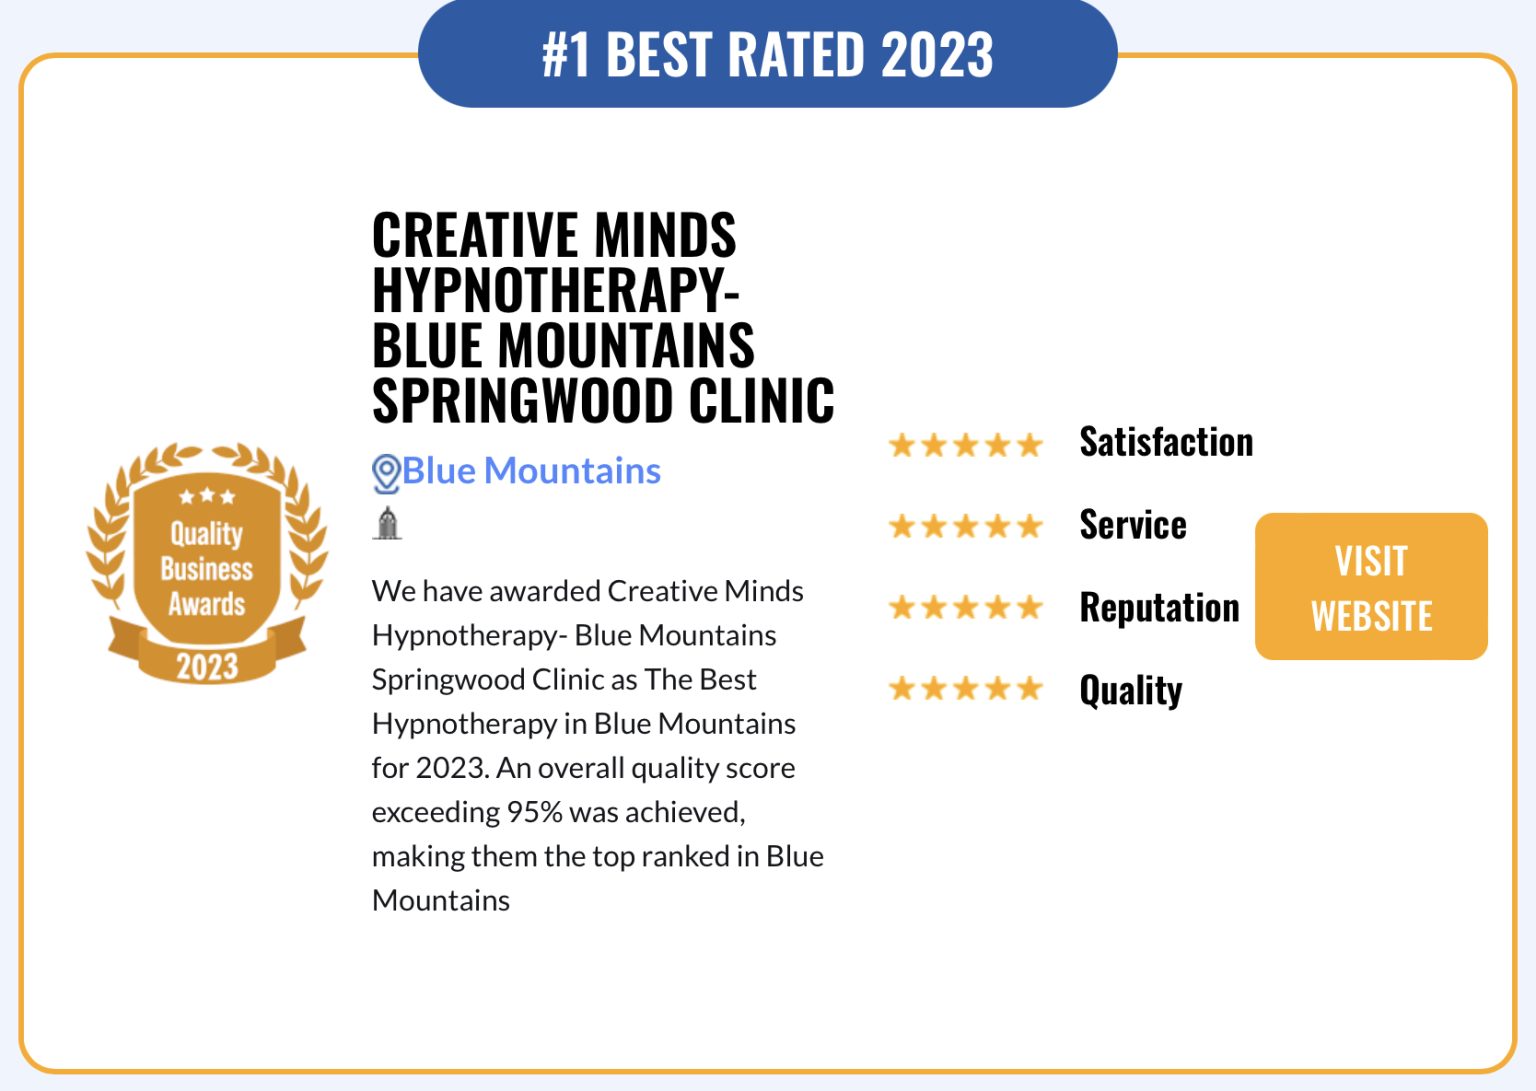 #1 Best Rated Hypnotherapy Clinic in Blue Mountains